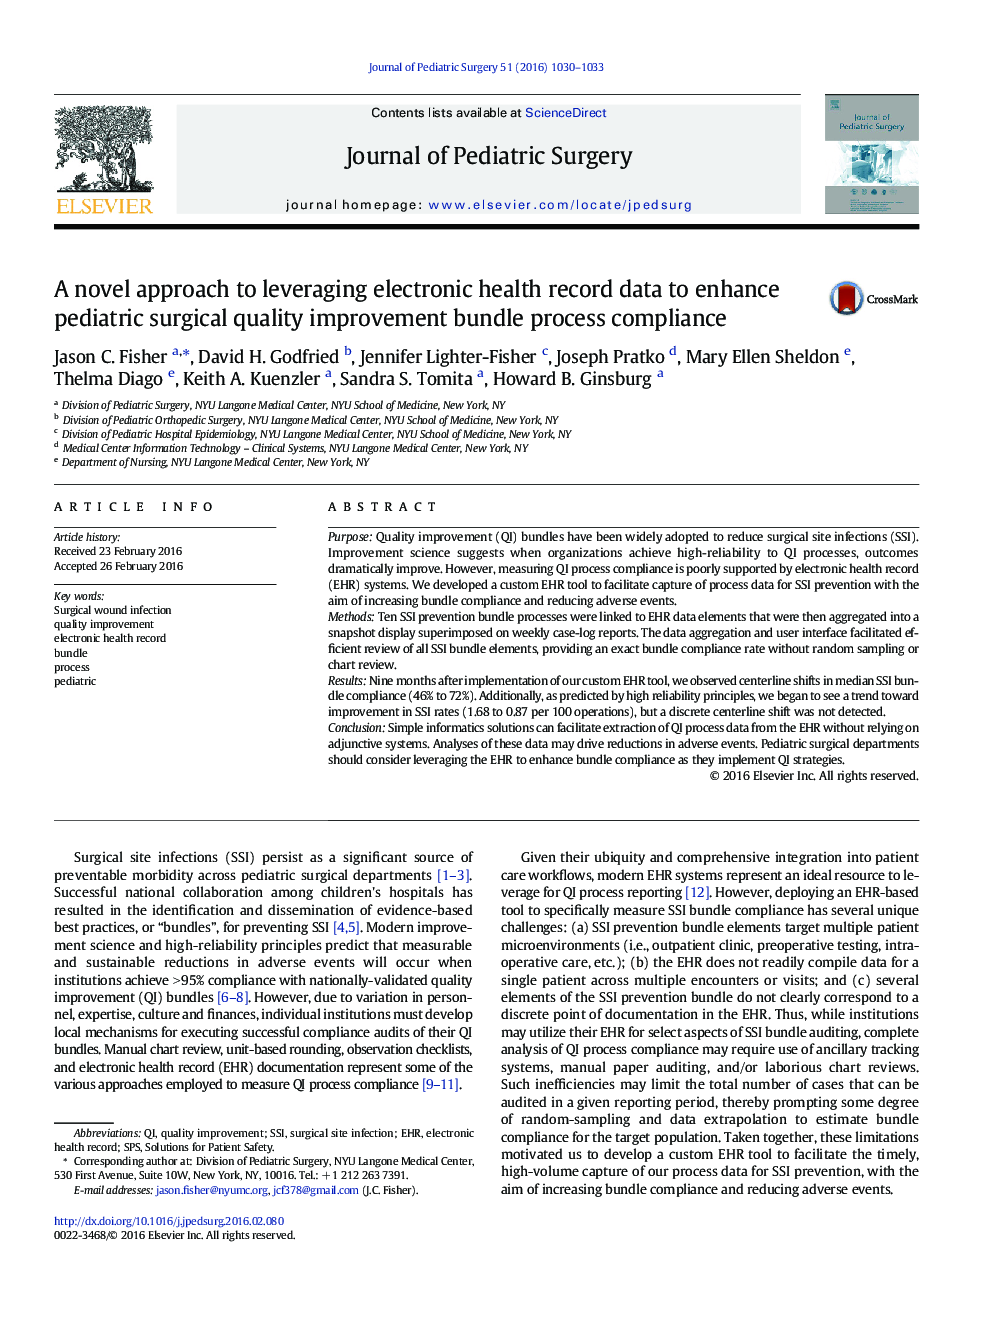 A novel approach to leveraging electronic health record data to enhance pediatric surgical quality improvement bundle process compliance